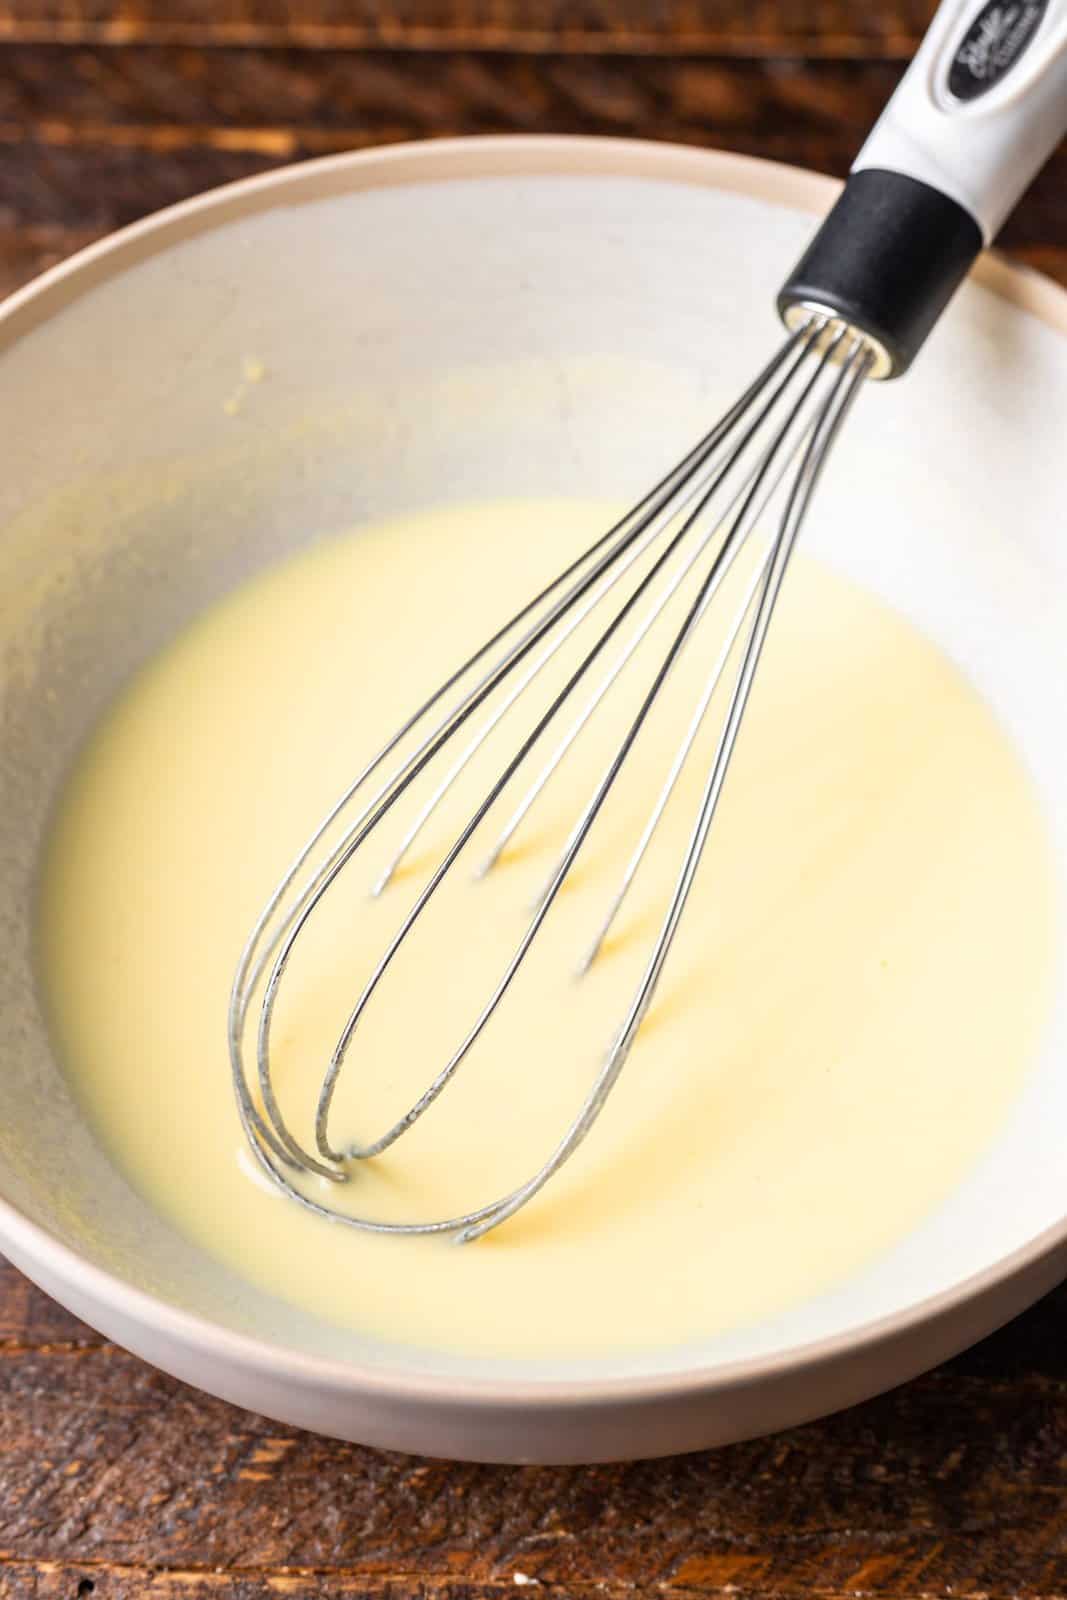 banana pudding whisked together in a bowl with milk.